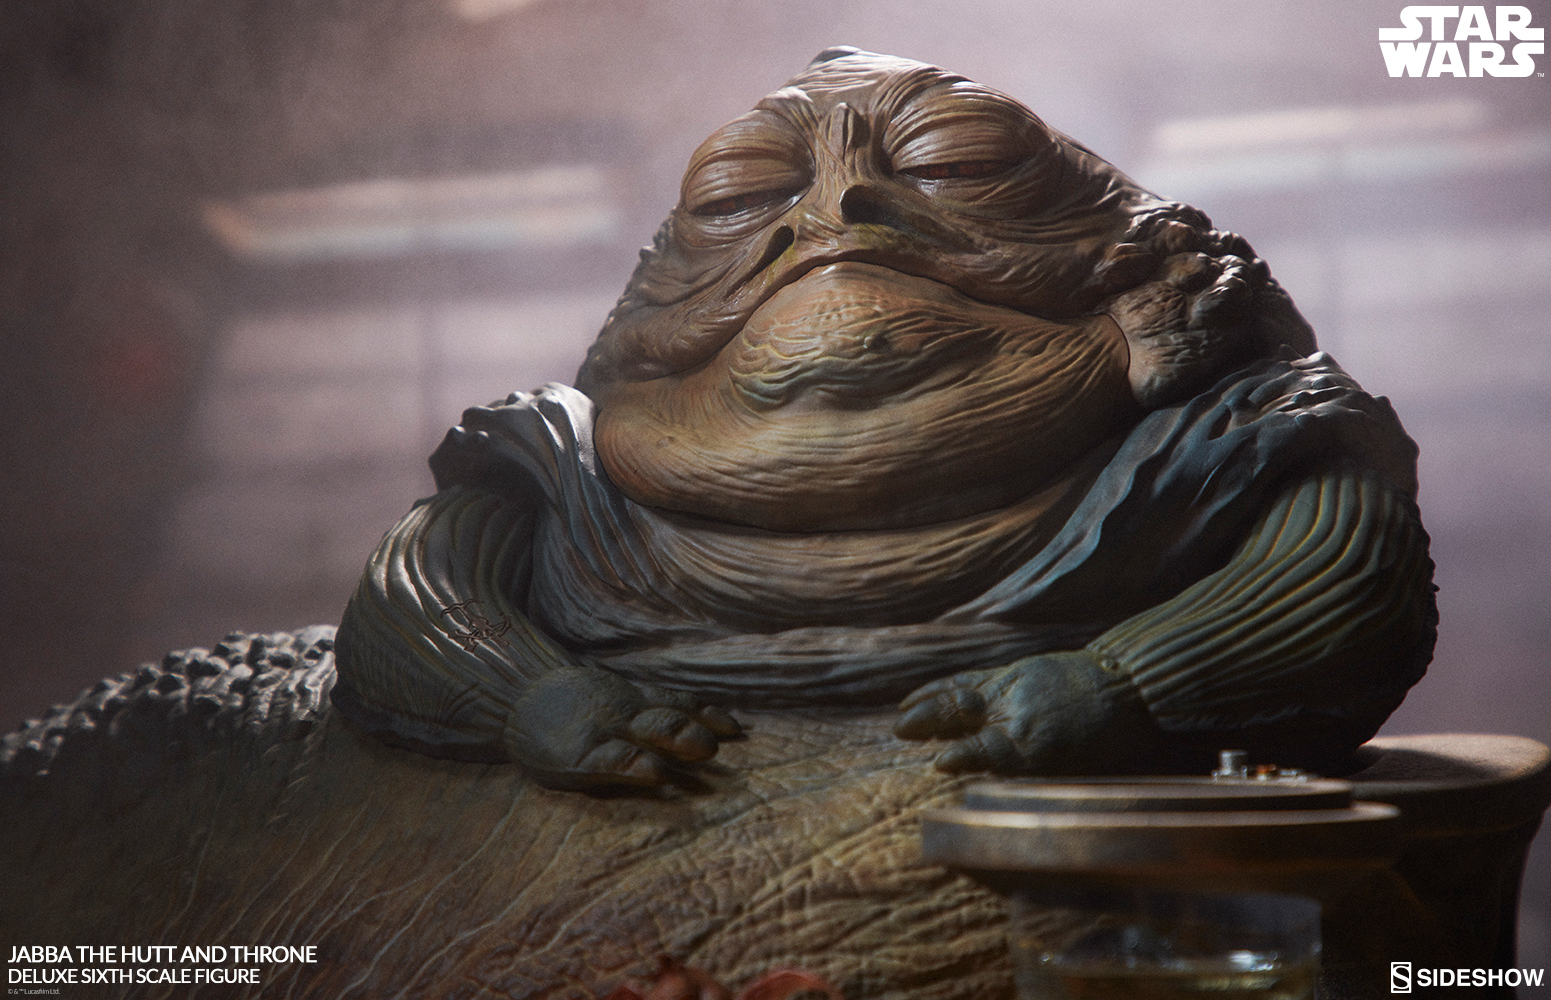 star-wars-jabba-the-hutt-and-throne-deluxe-sixth-scale-figure-sideshow-100410-34